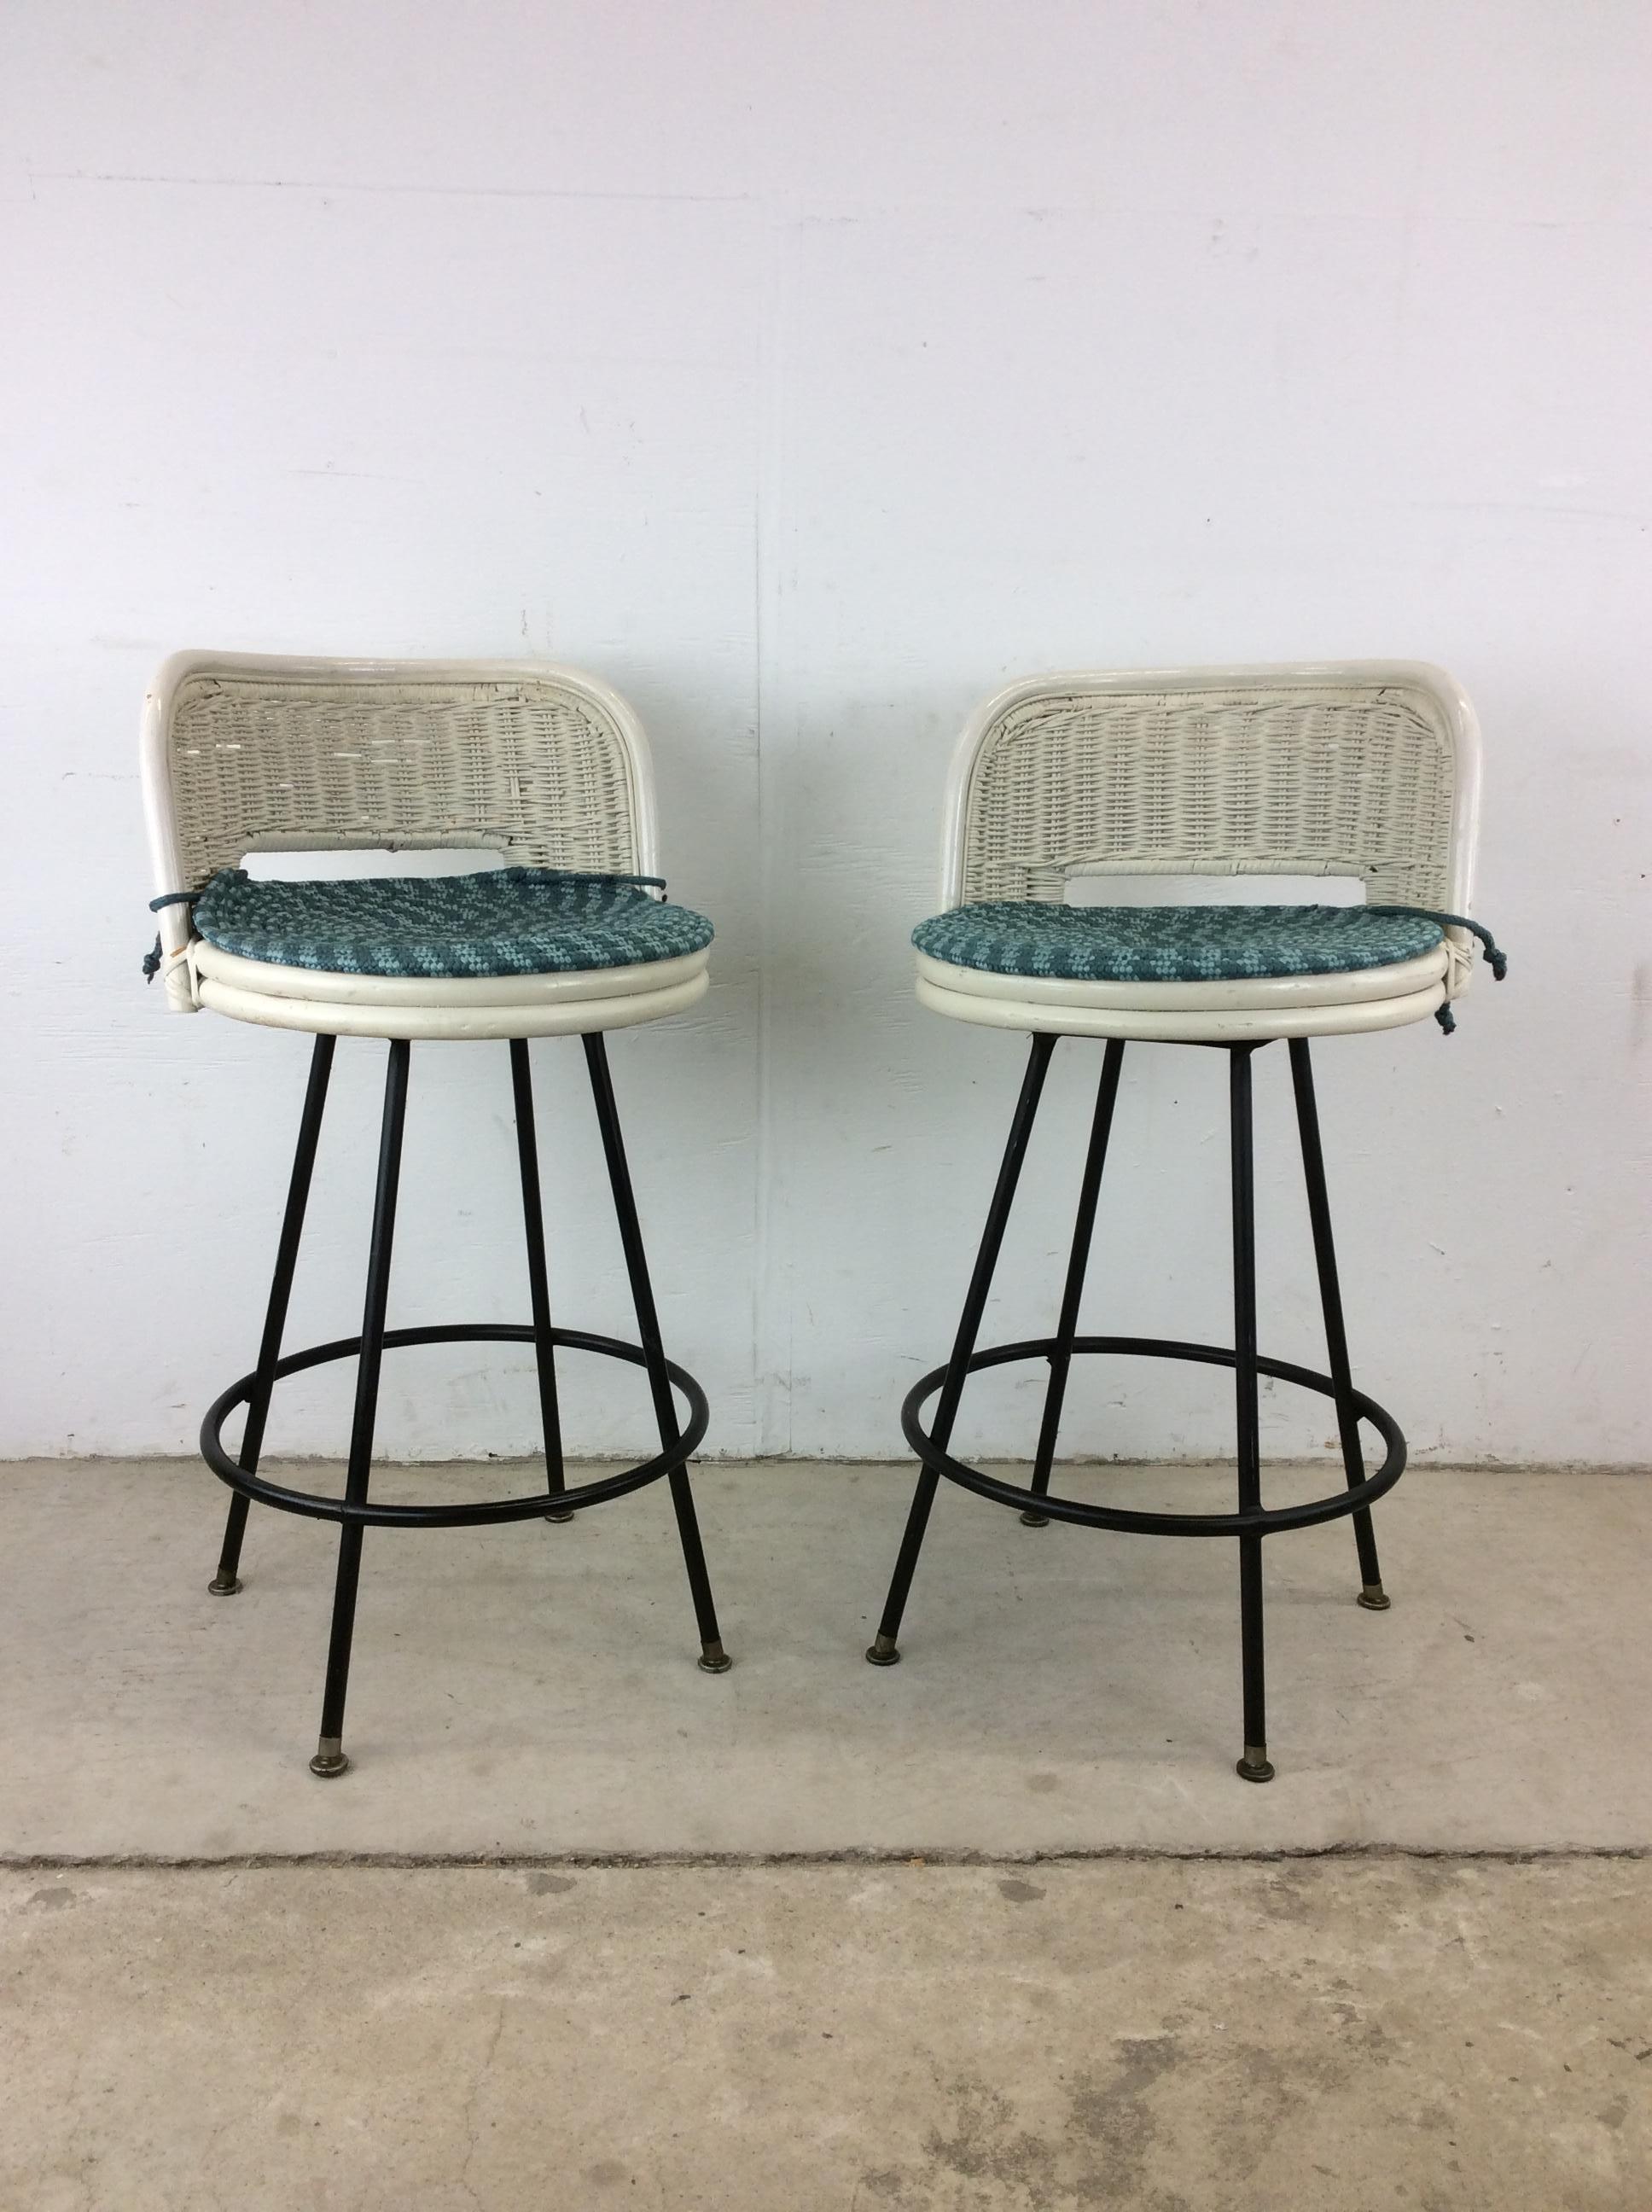 This pair of mid century modern bar stools in the style of Arthur Umanoff feature white painted wicker construction with swivel seat atop a black painted metal base.

Dimensions: 17.5w 17d 32h 14sh

Condition: Wicker seats are in very good